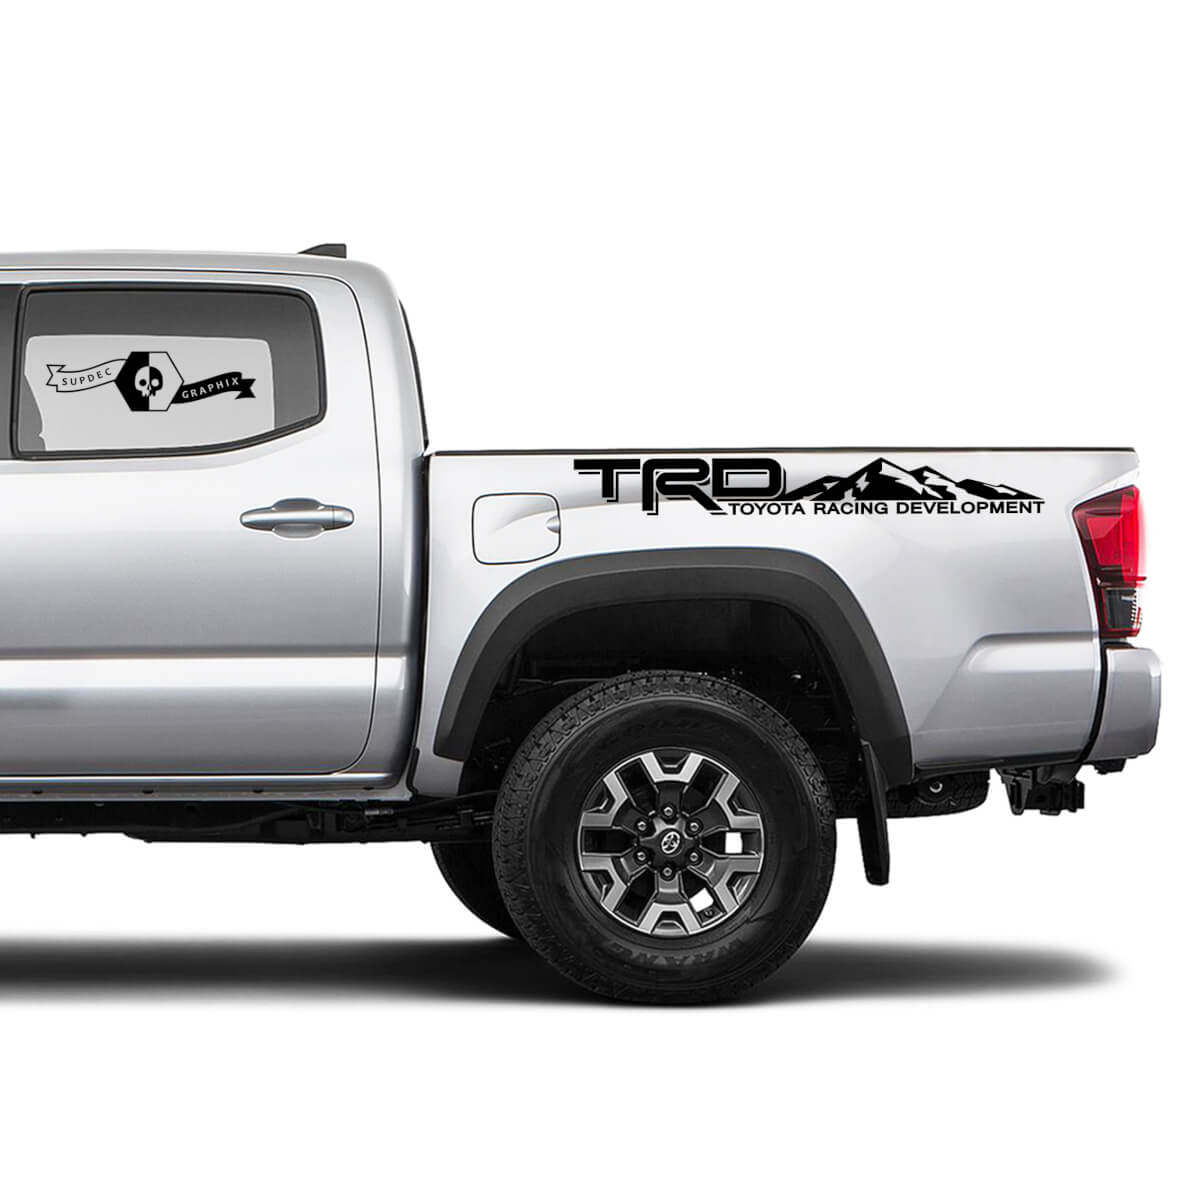 TRD off road Mountains Style for Side Truck Decals Stickers for Tacoma Tundra Hilux 4Runner #3